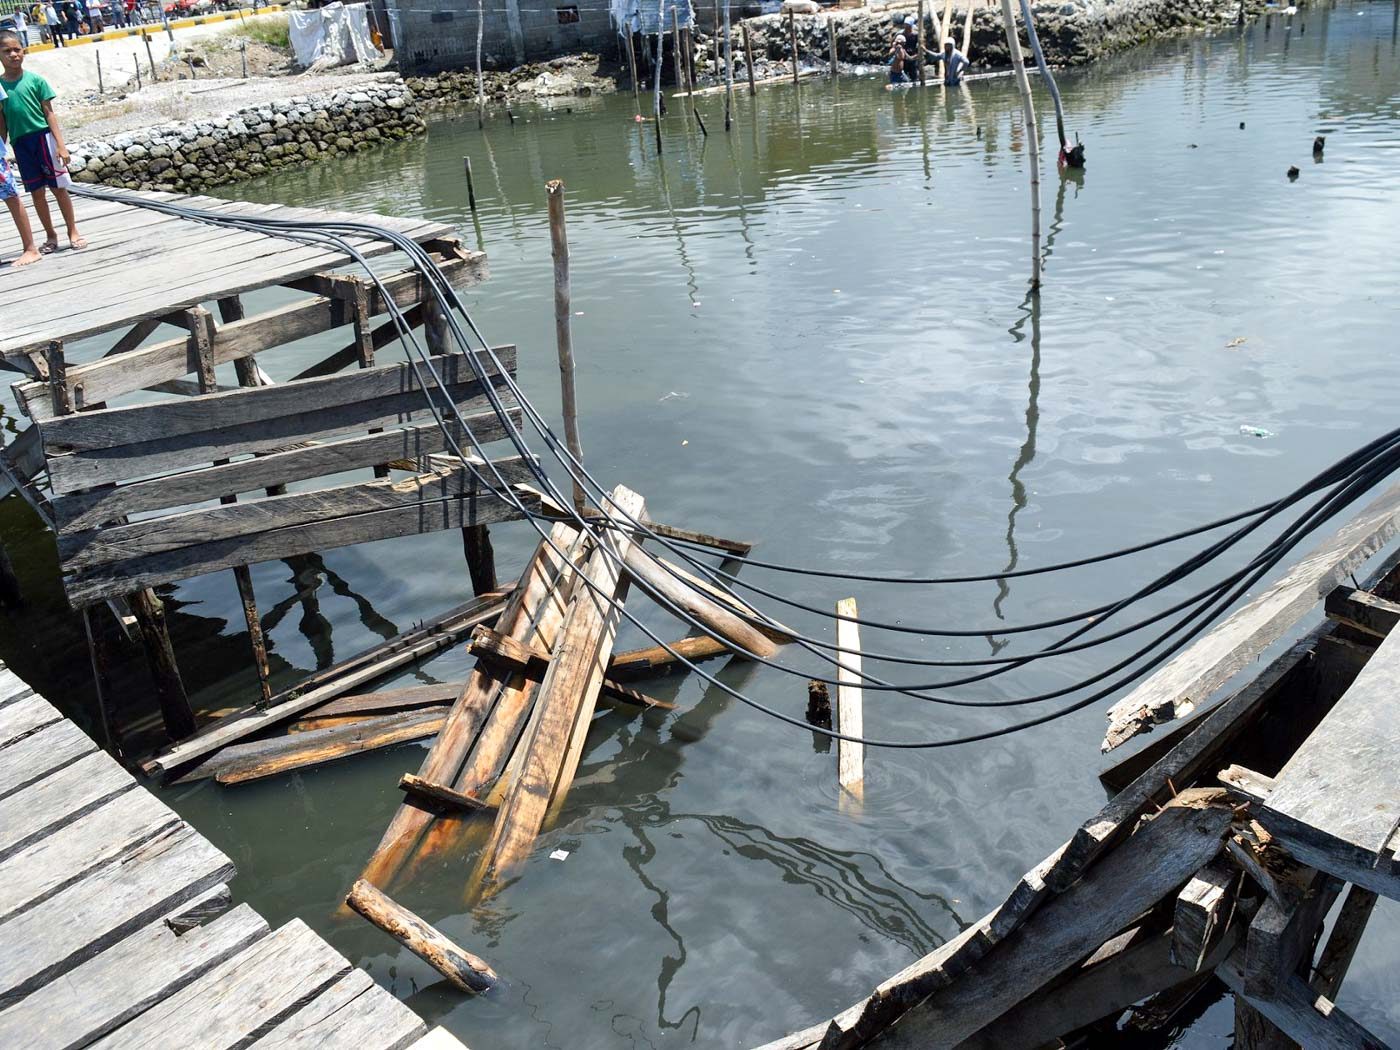 LOOK: Zamboanga City footbridge collapses during officials’ inspection